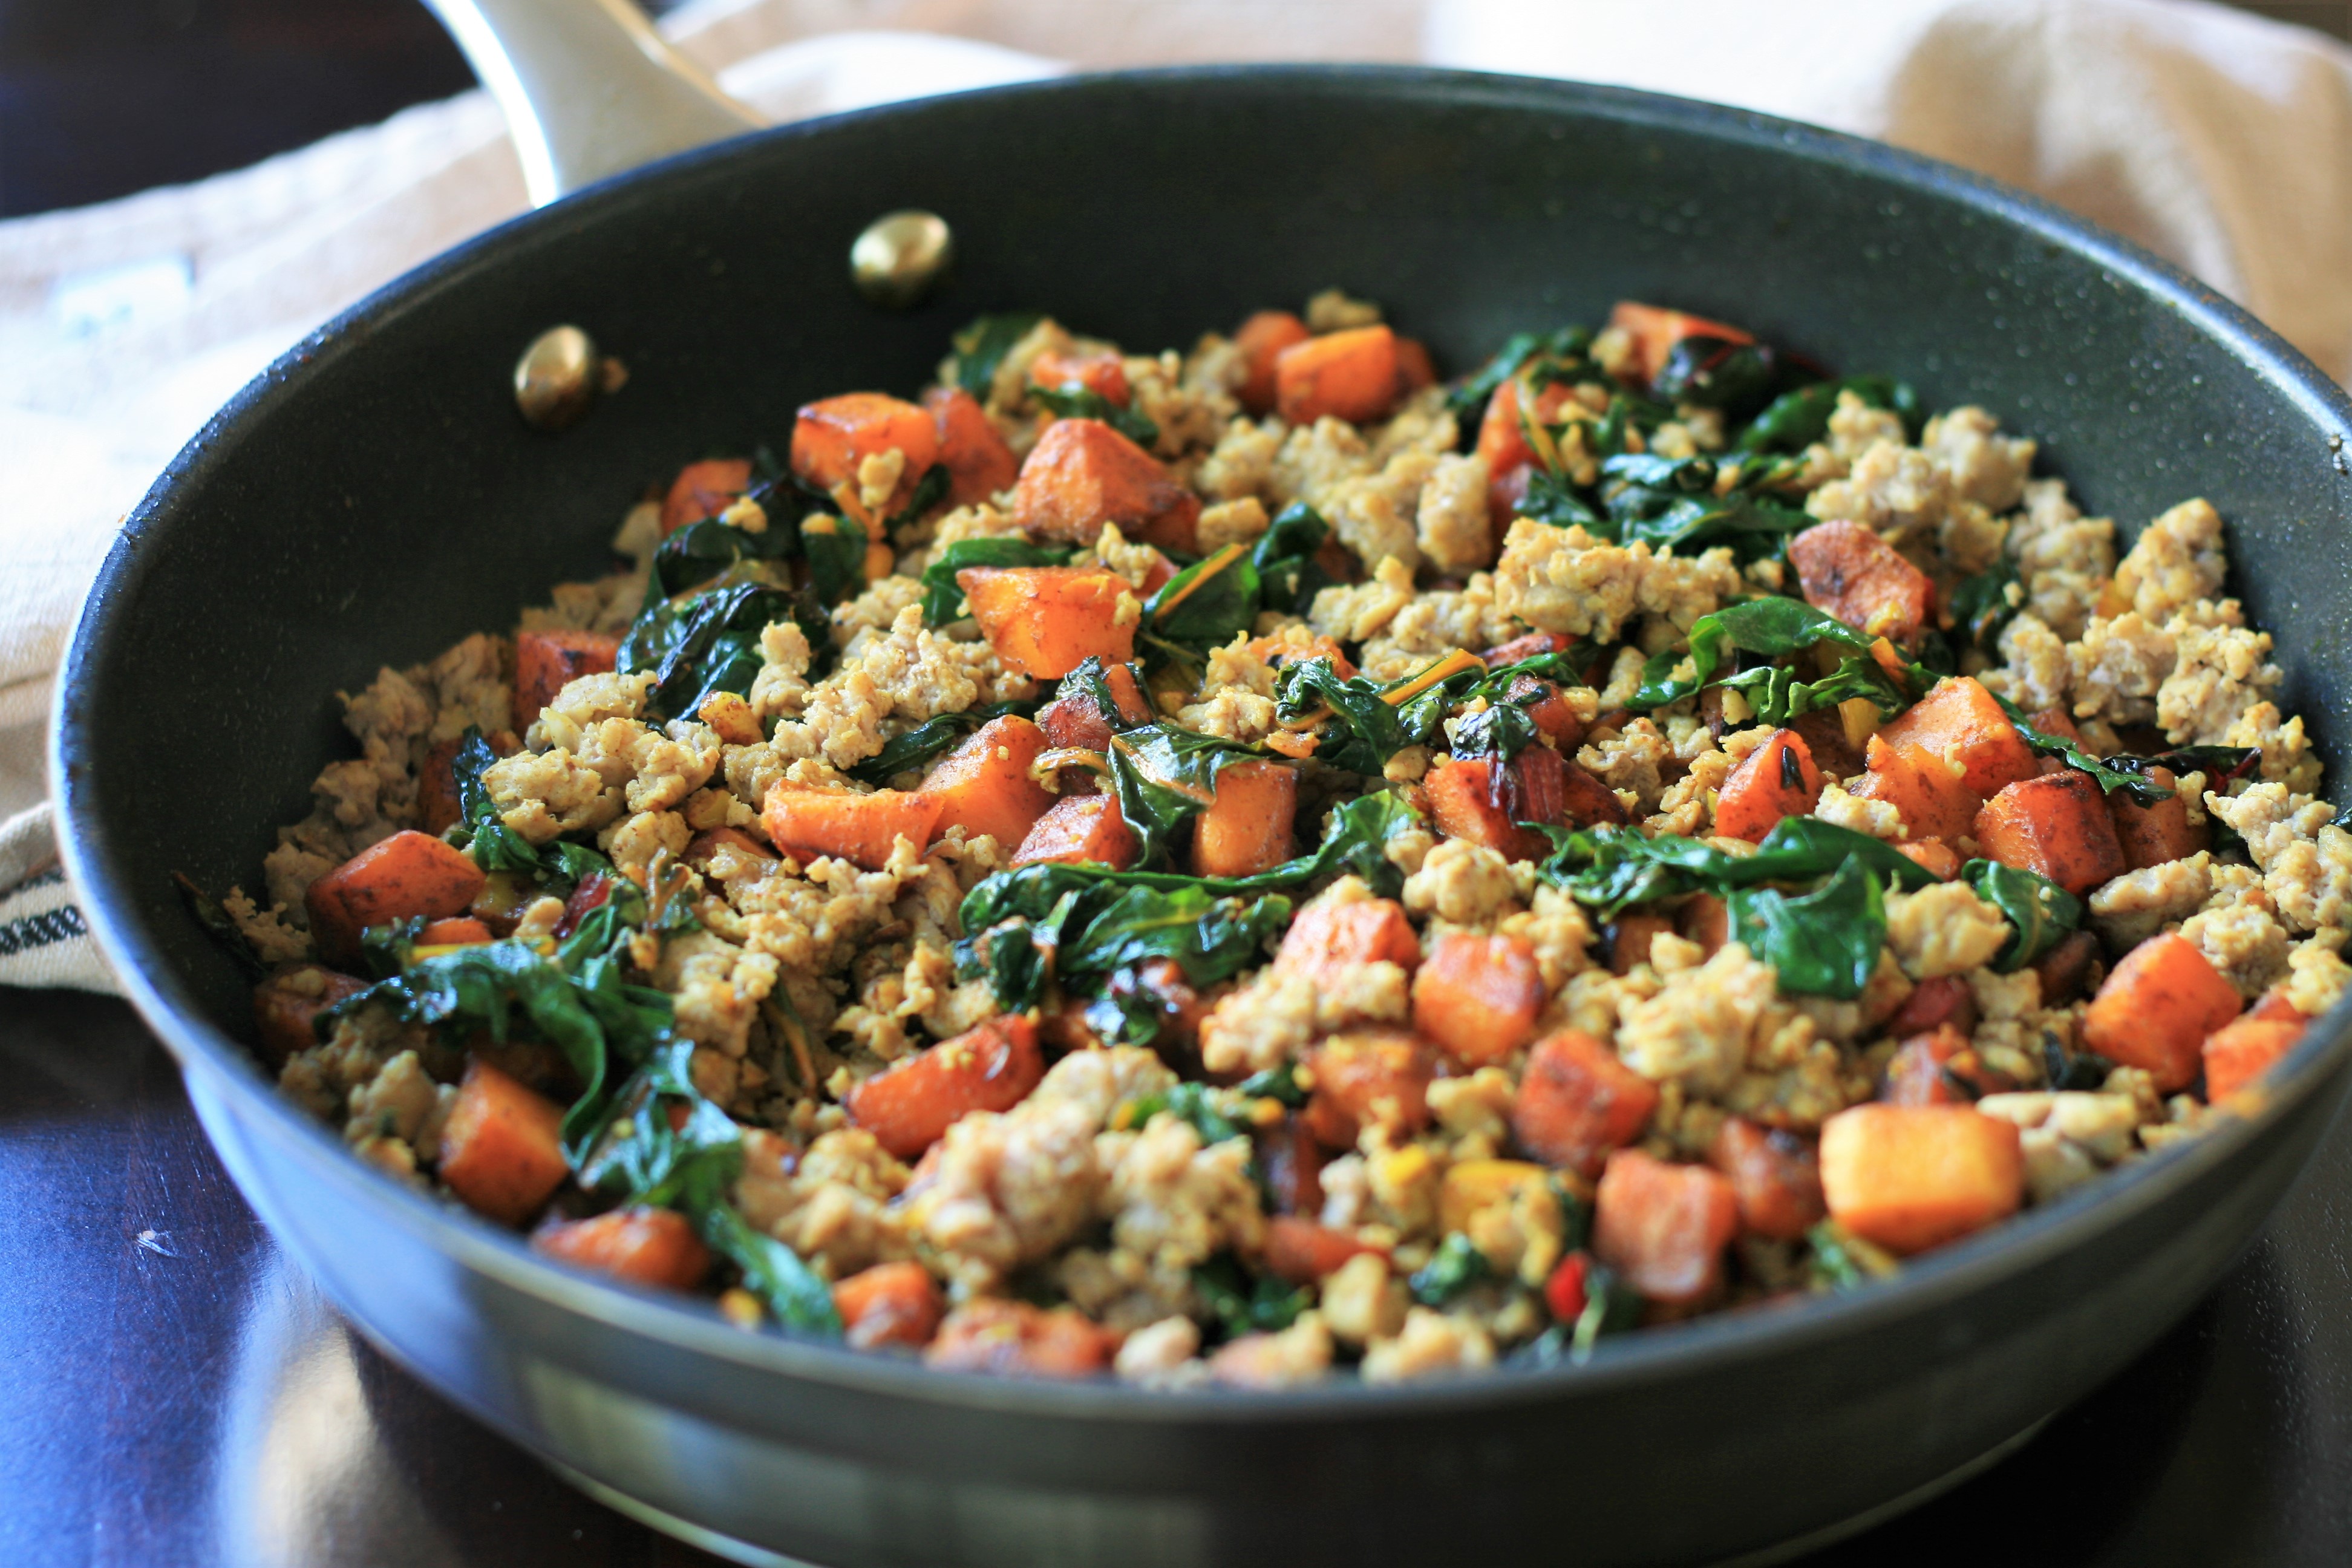 <p>Sweet potatoes, ground turkey, sausages and Swiss chard are flavored with Moroccan-inspired spices in this filling breakfast or brunch dish. "Very flavorful breakfast idea!" says Allrecipes Allstar France C. "A tasty combination of spices and it smells fantastic while cooking."</p>
                          